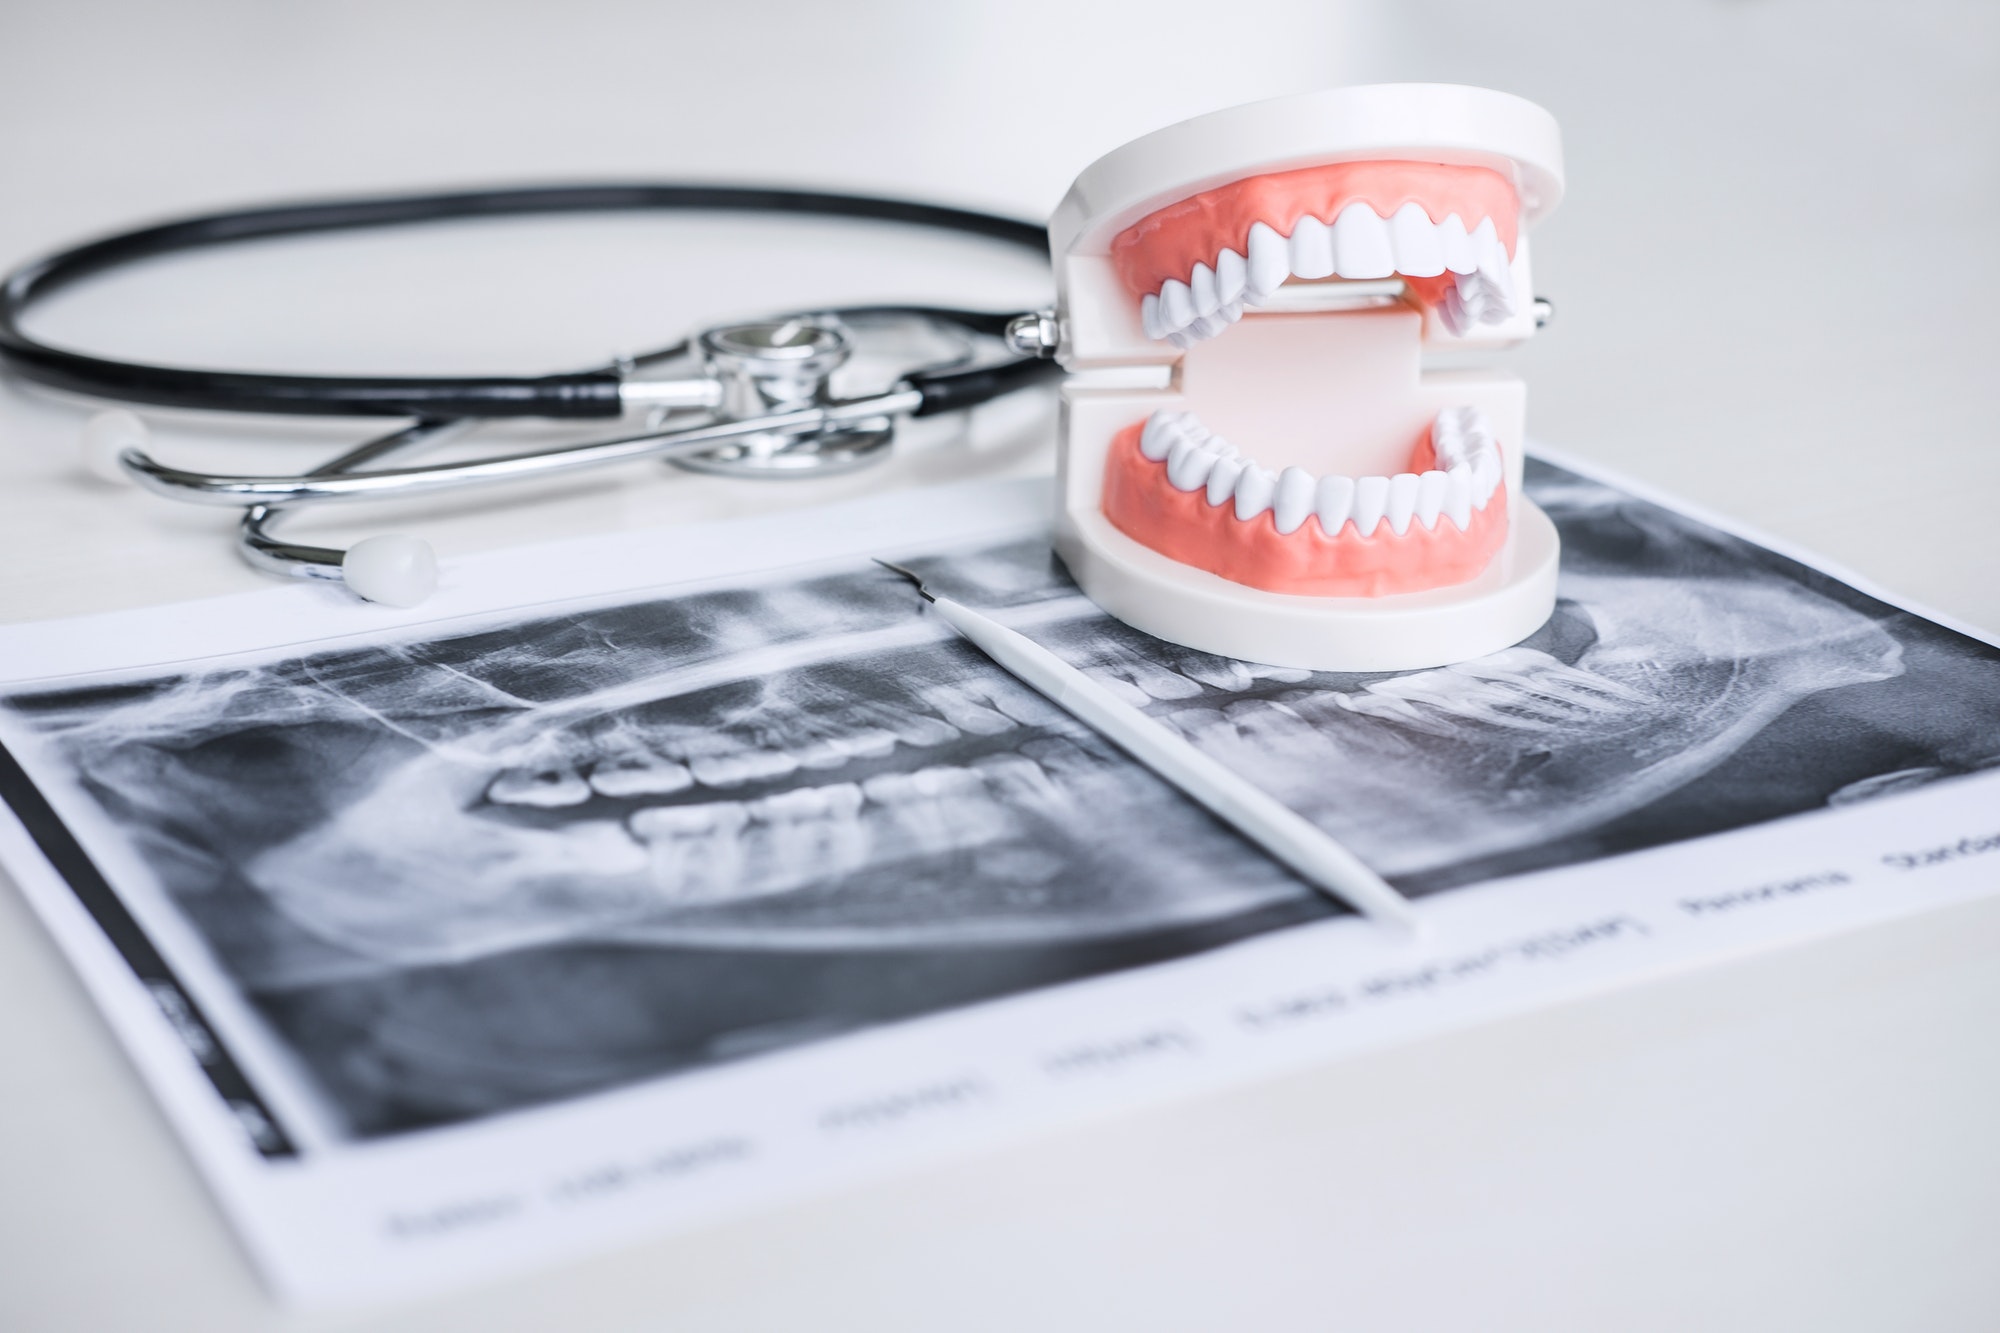 Dental model and equipment on tooth x-ray film and stethoscope used in the treatment of dental and